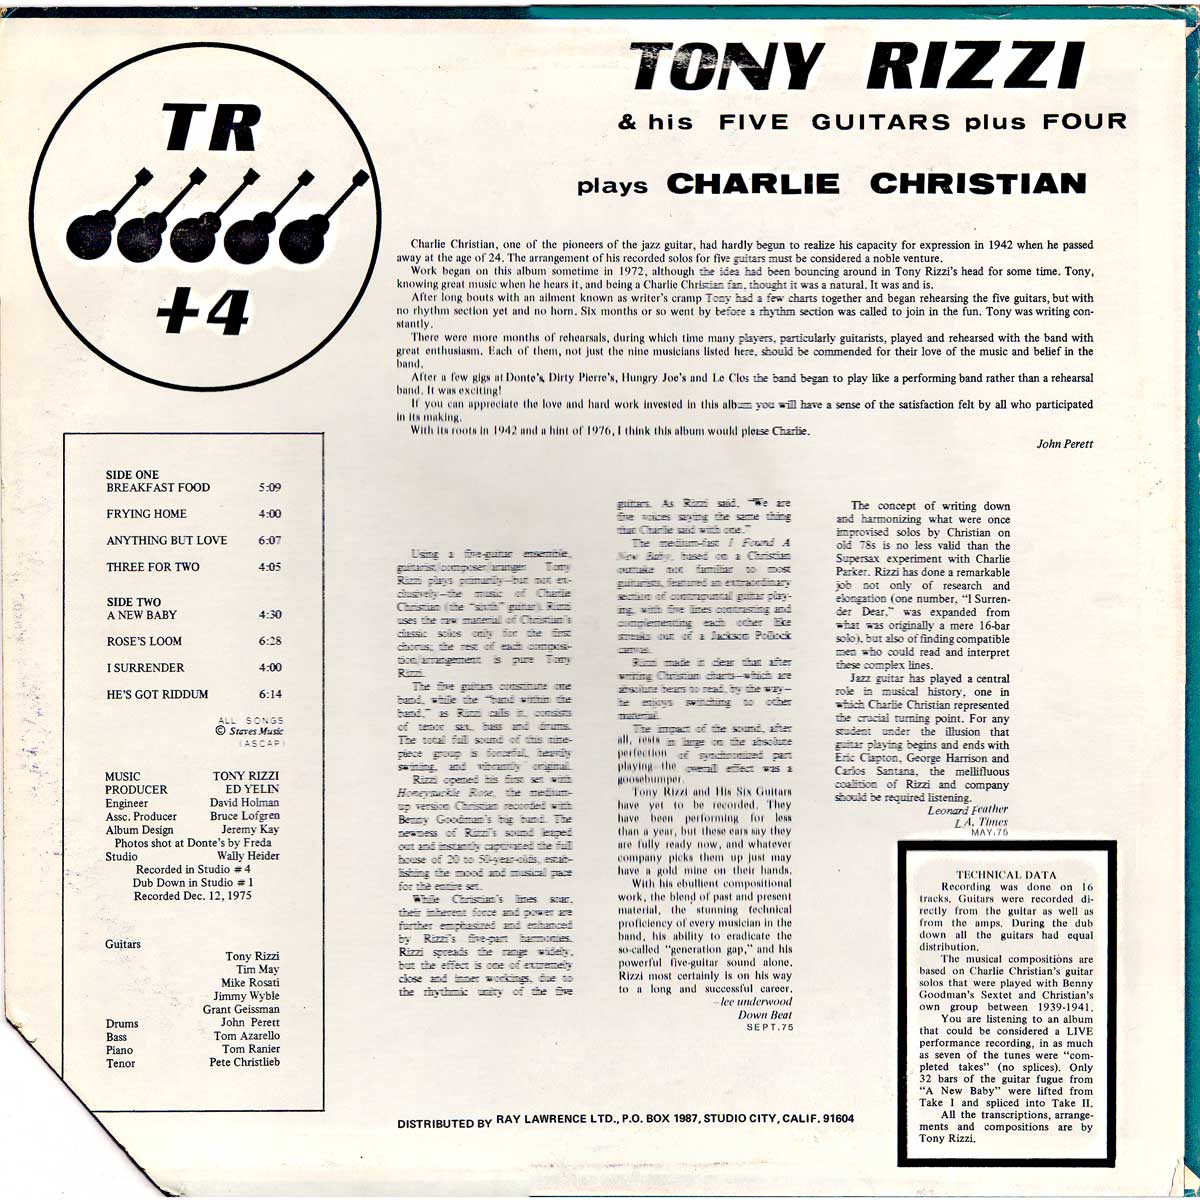 Tony Rizzi & His Five Guitar Plus Four - Plays Charlie Christian - Back cover